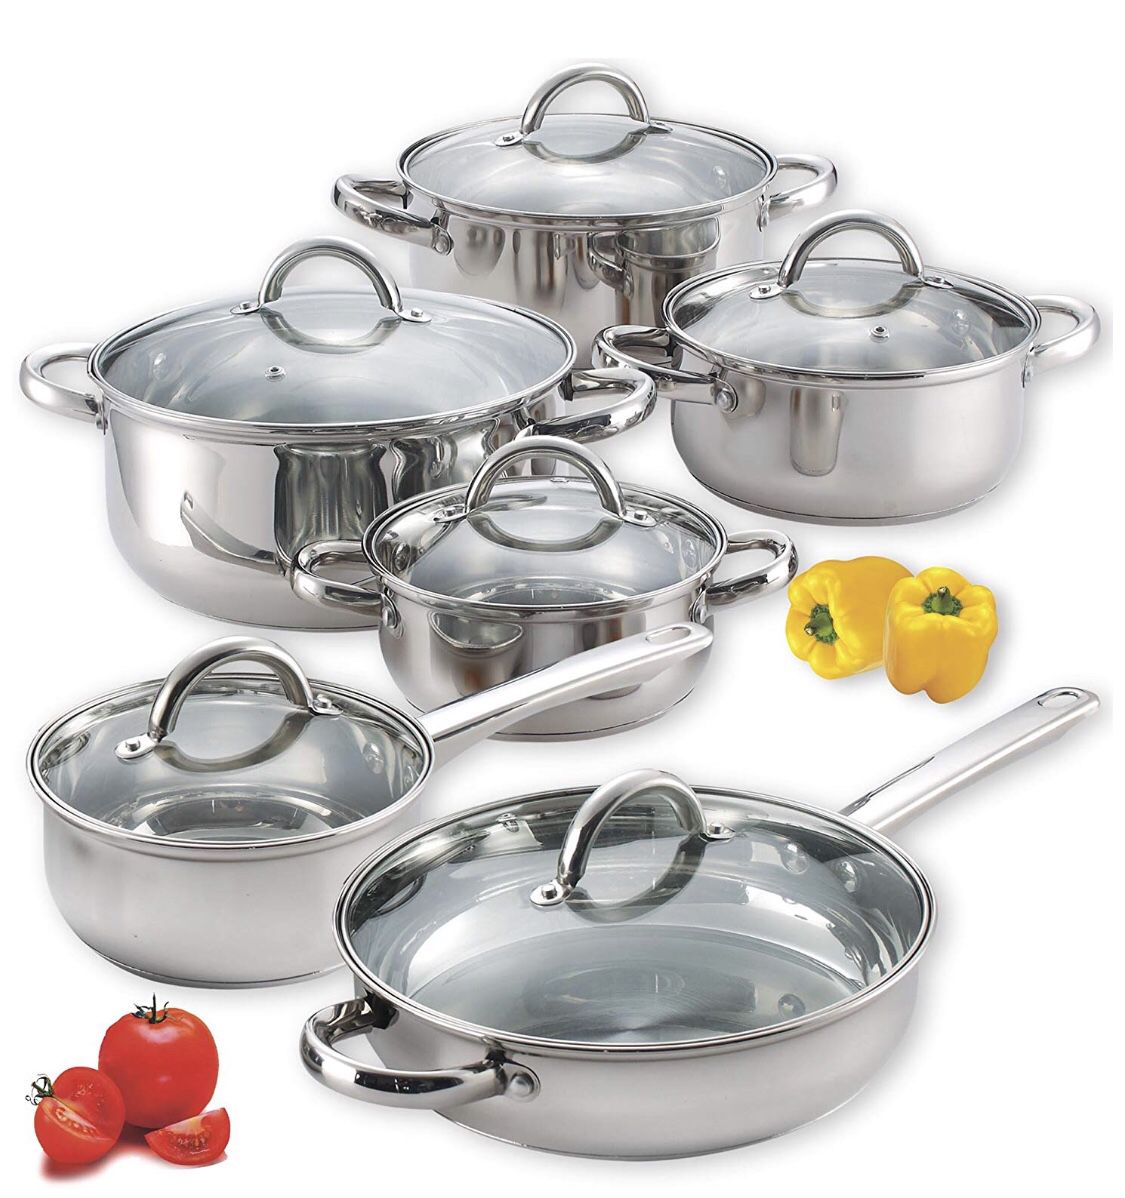 12-Piece Stainless Steel Cookware Set, Silver SHIP ONLY